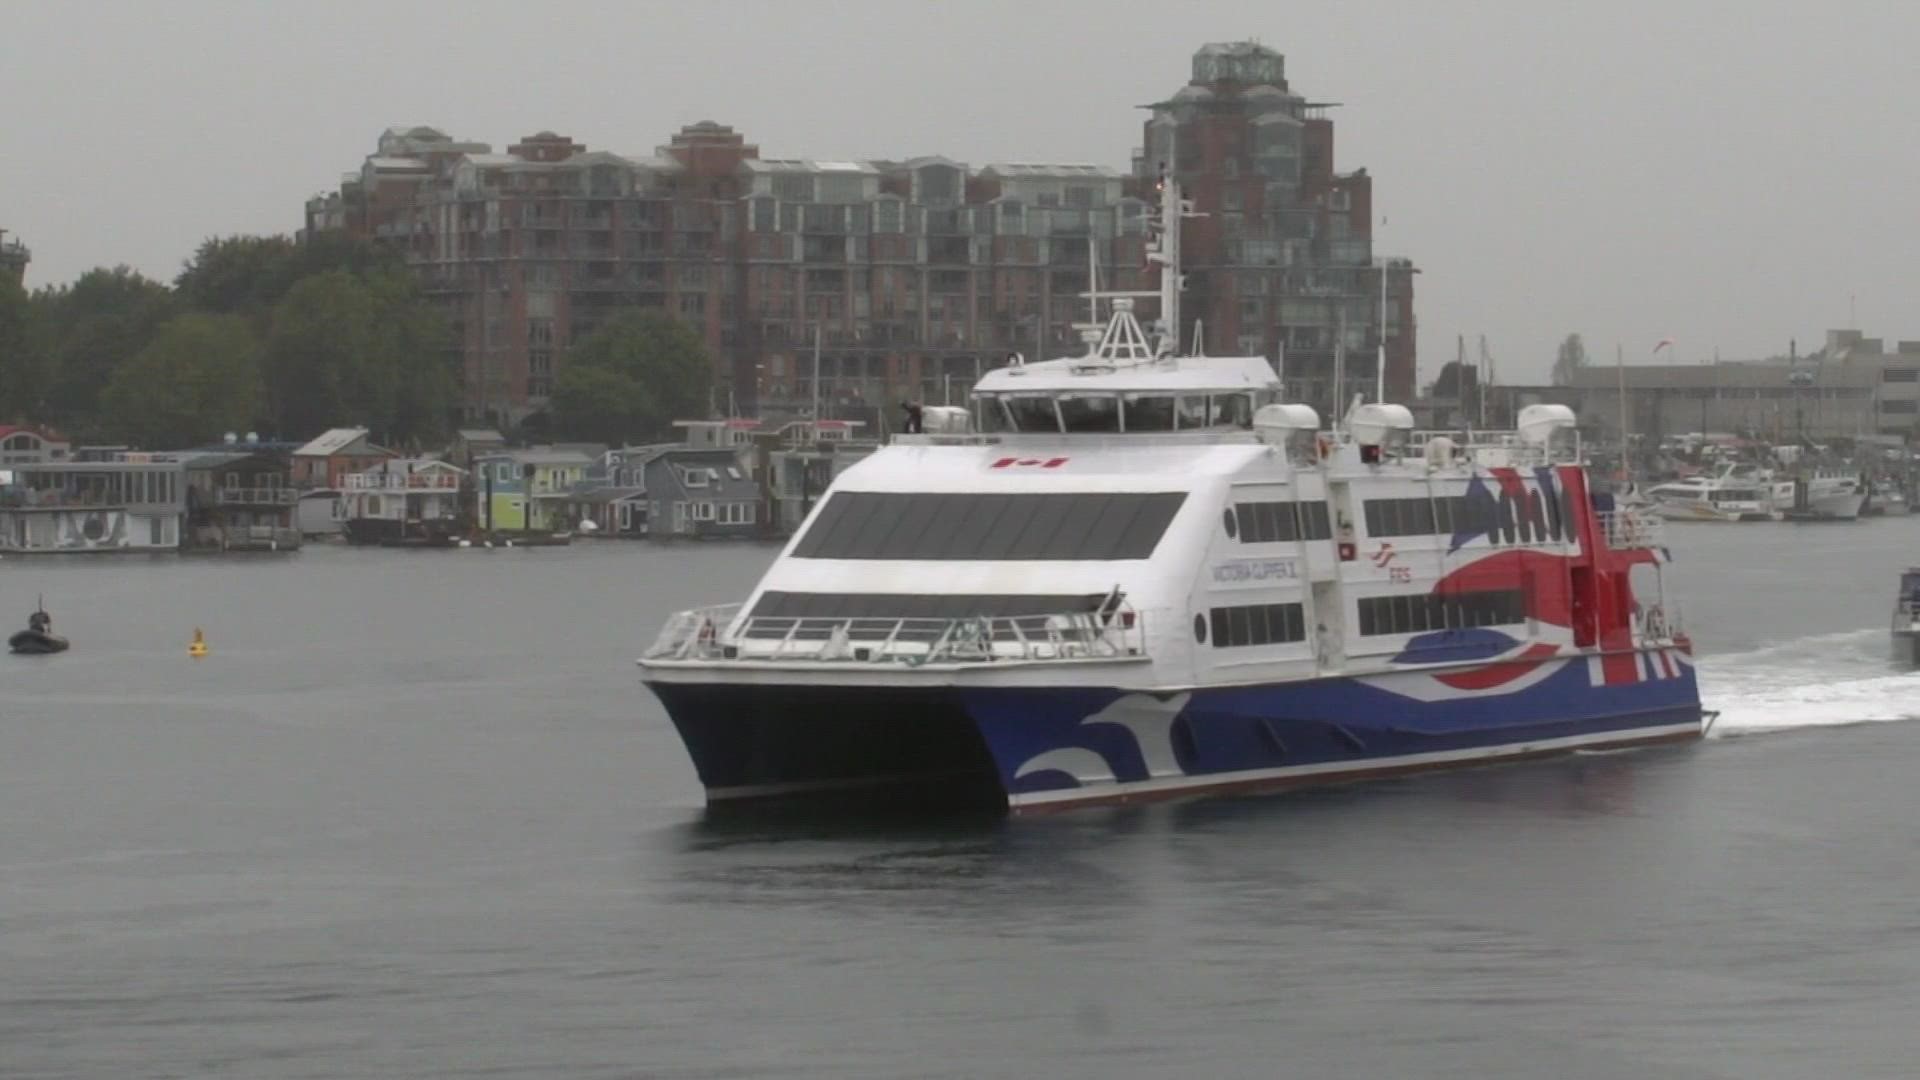 The Clipper docked in Victoria, British Columbia, Friday for its first sailing to the city since the pandemic.